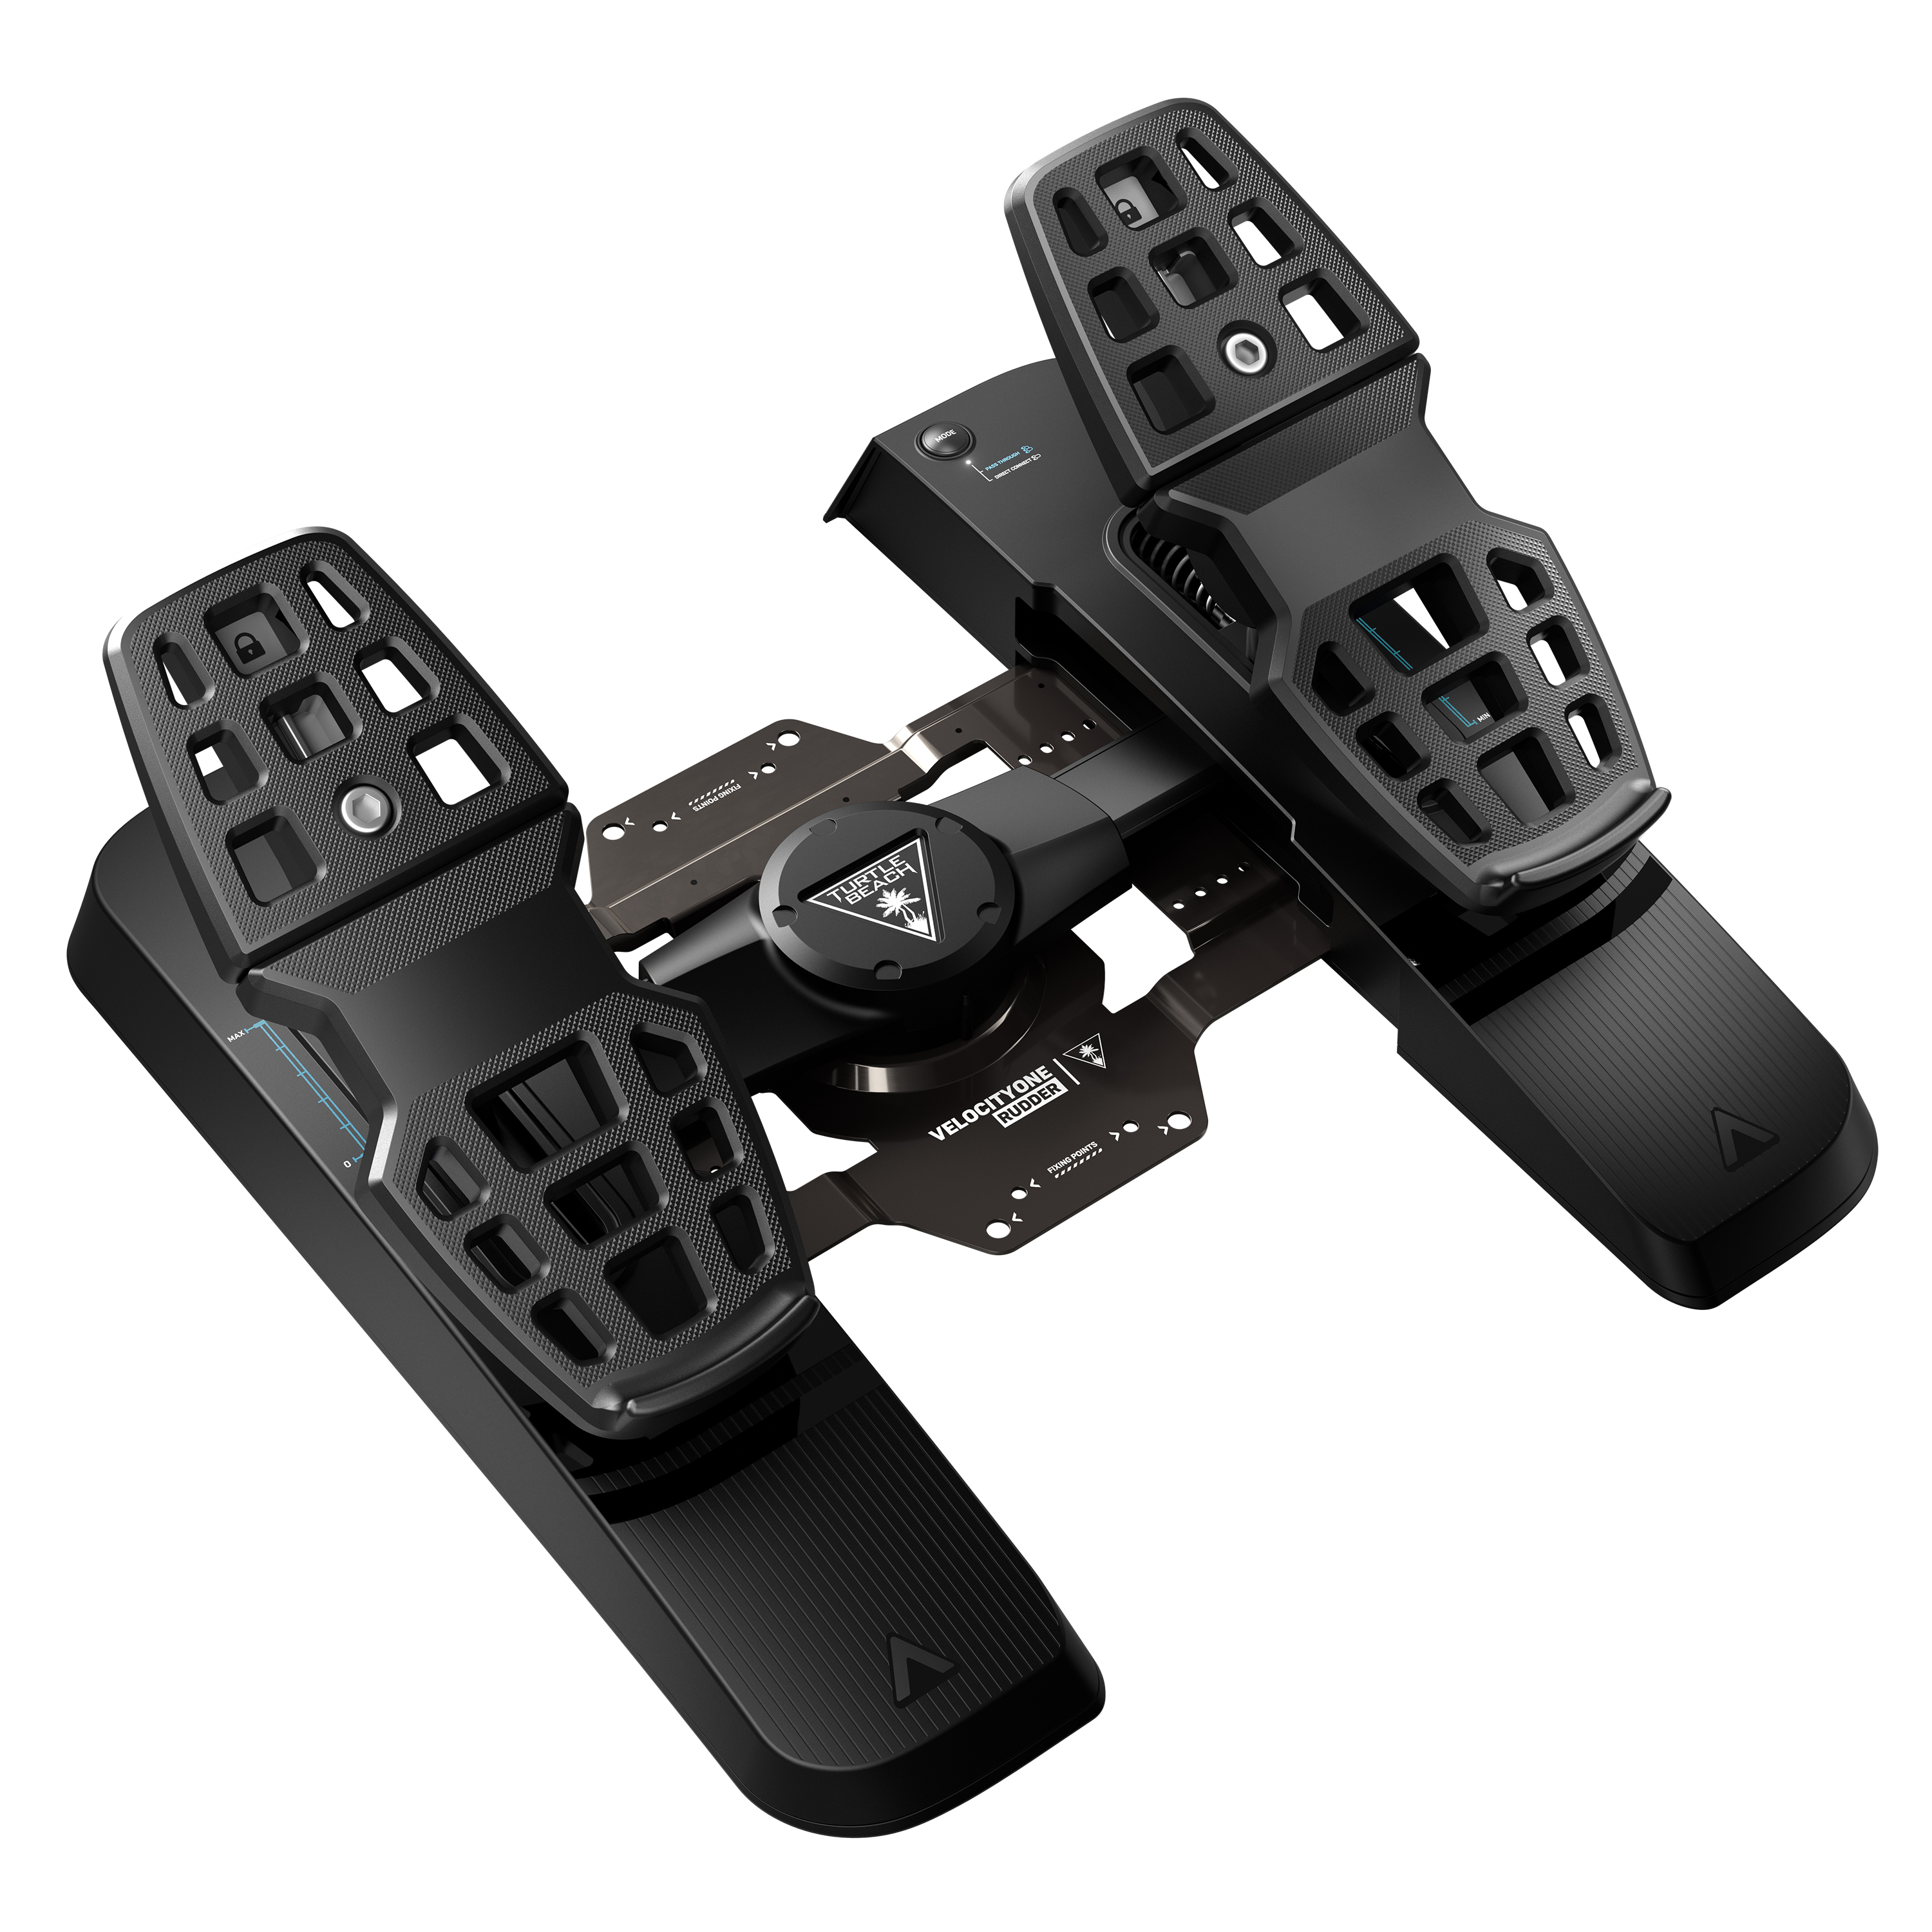 VelocityOne Rudder Pedals Product Image (Turtle Beach)